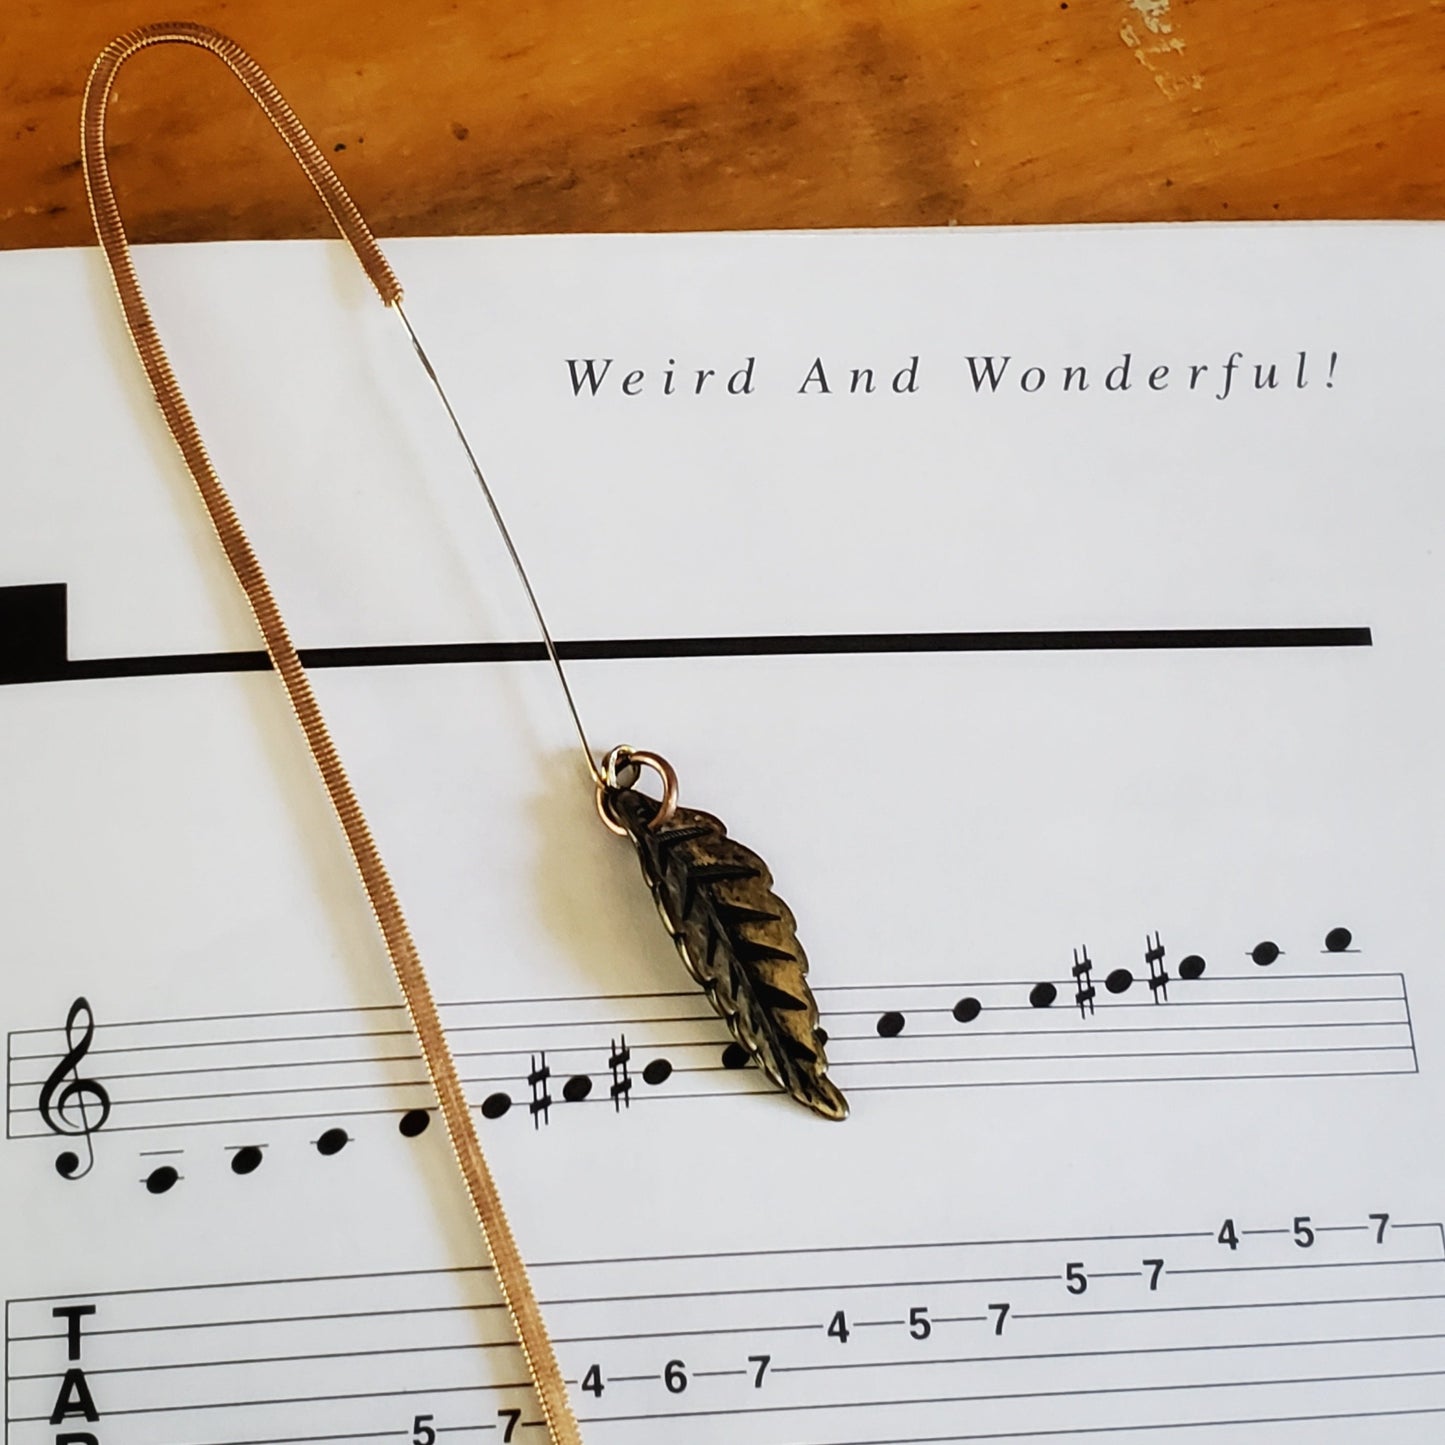 hook style bookmark made from an upcycled guitar string and a leaf shaped charm on a page of a book - Weird and Wonderful! is written in black on a white background, notes and guitar tabs are also on the page